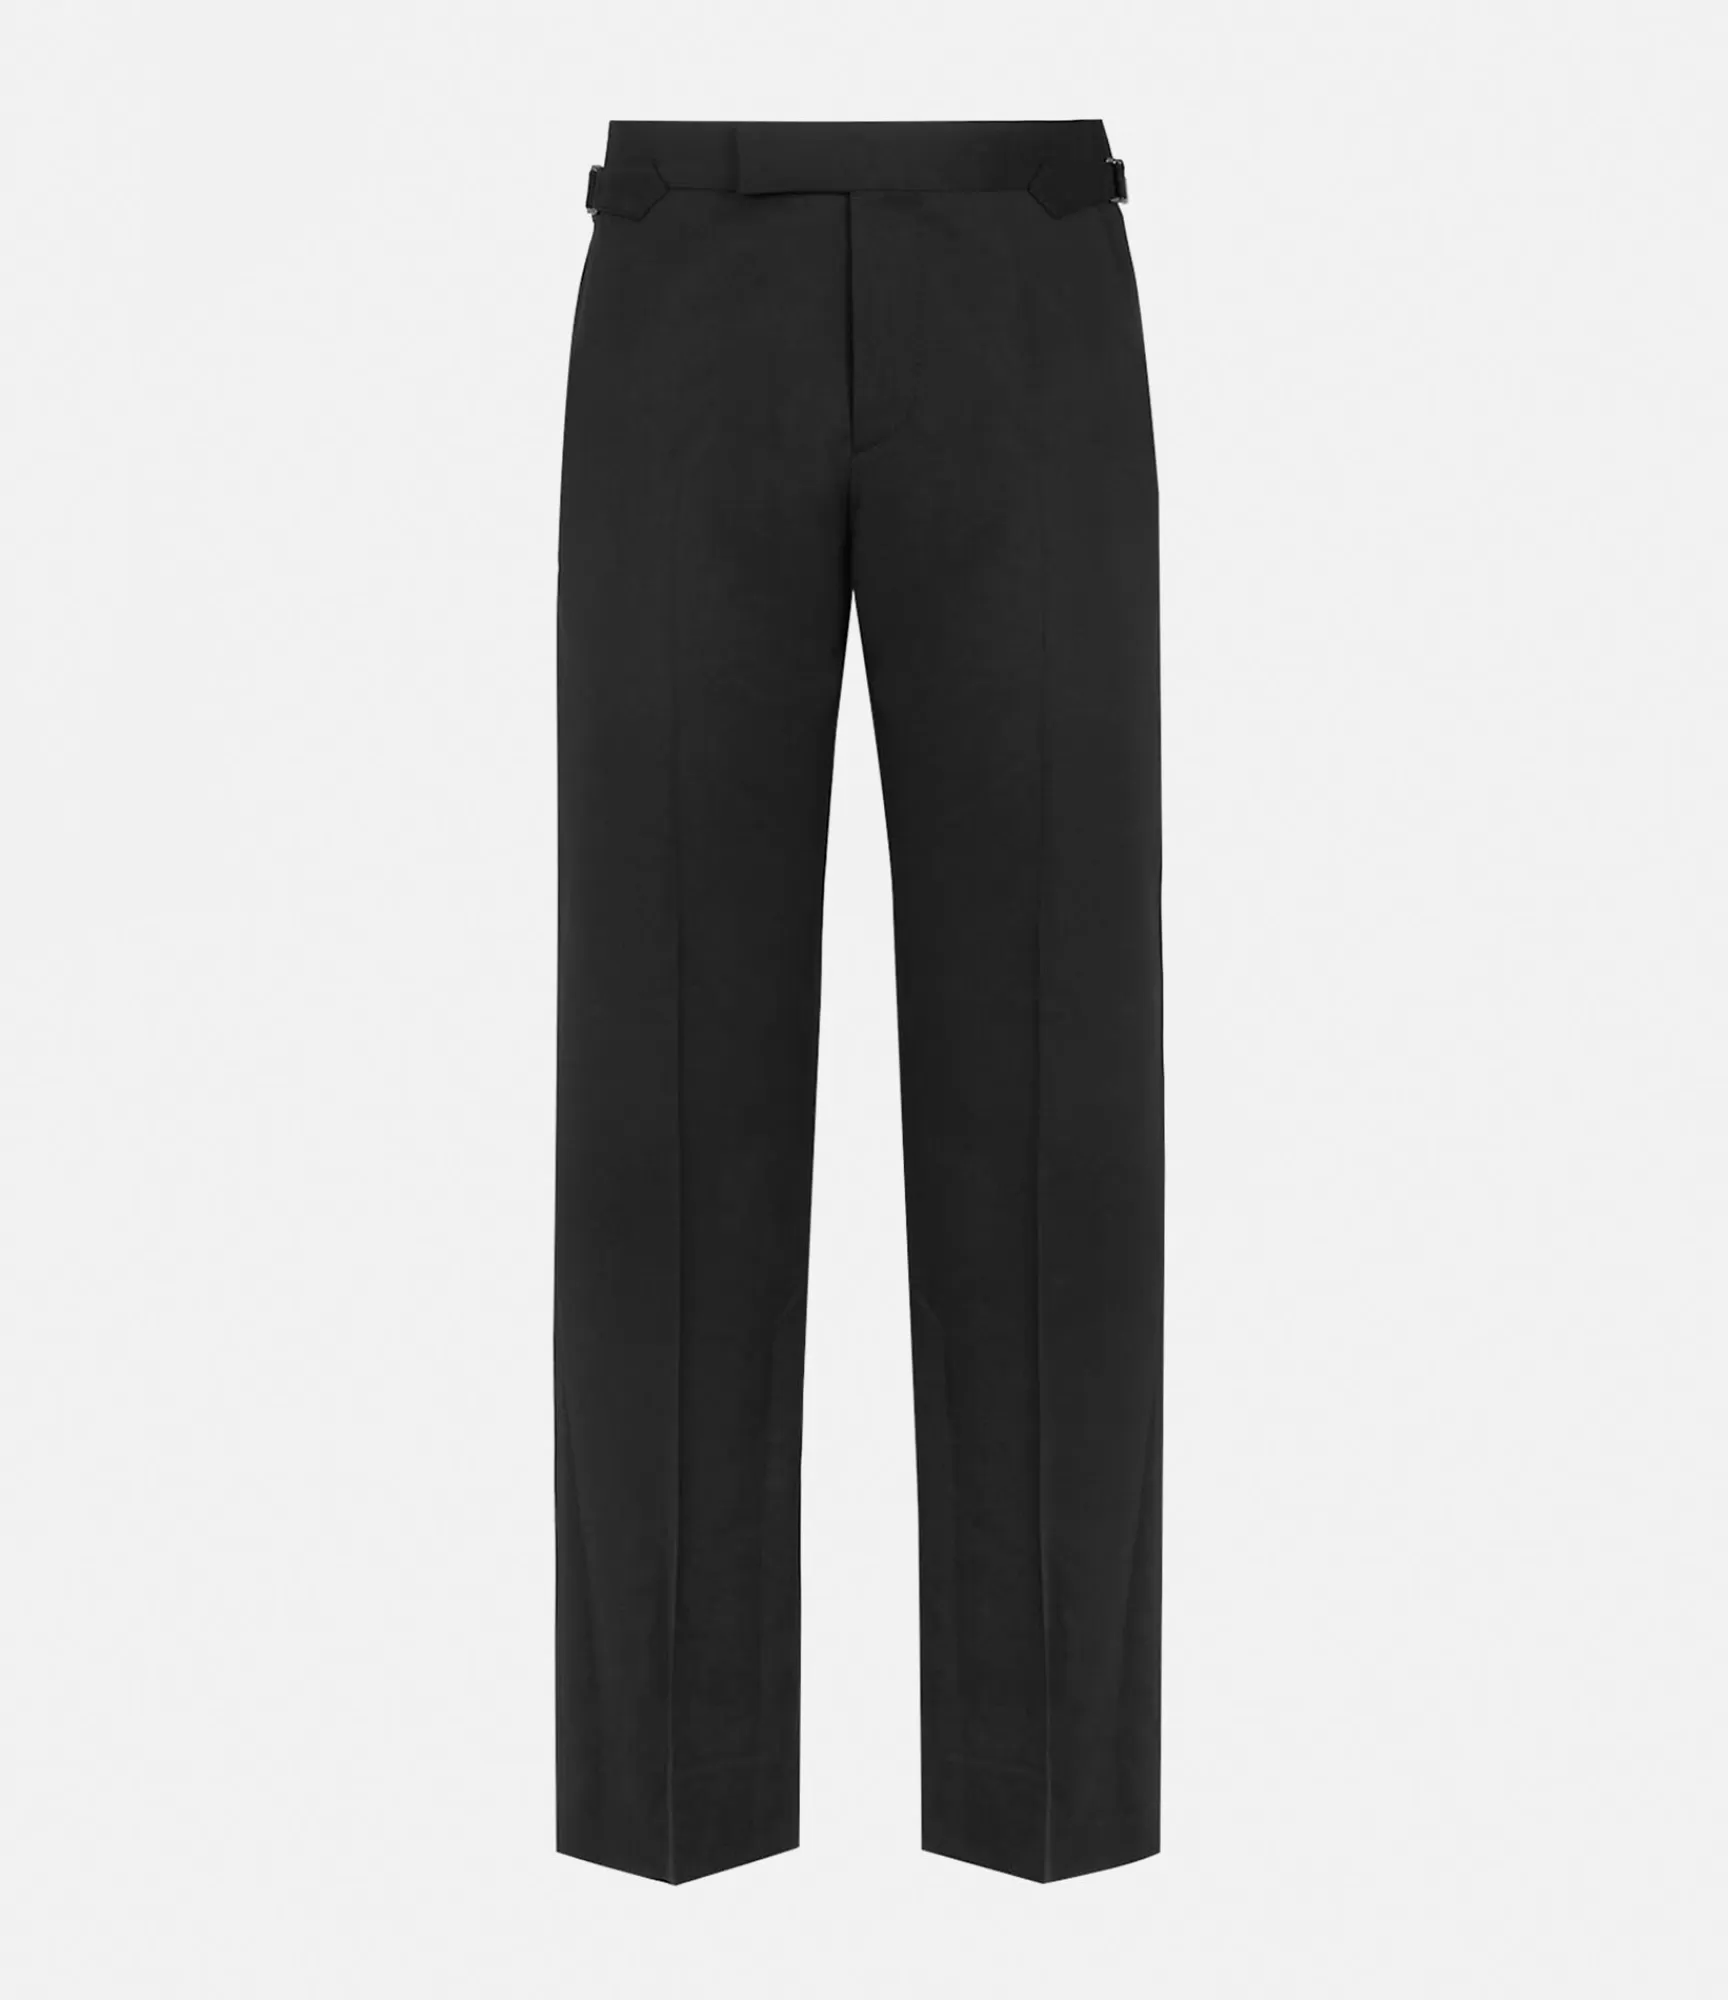 Vivienne Westwood Trousers and Shorts*Sang trousers Black